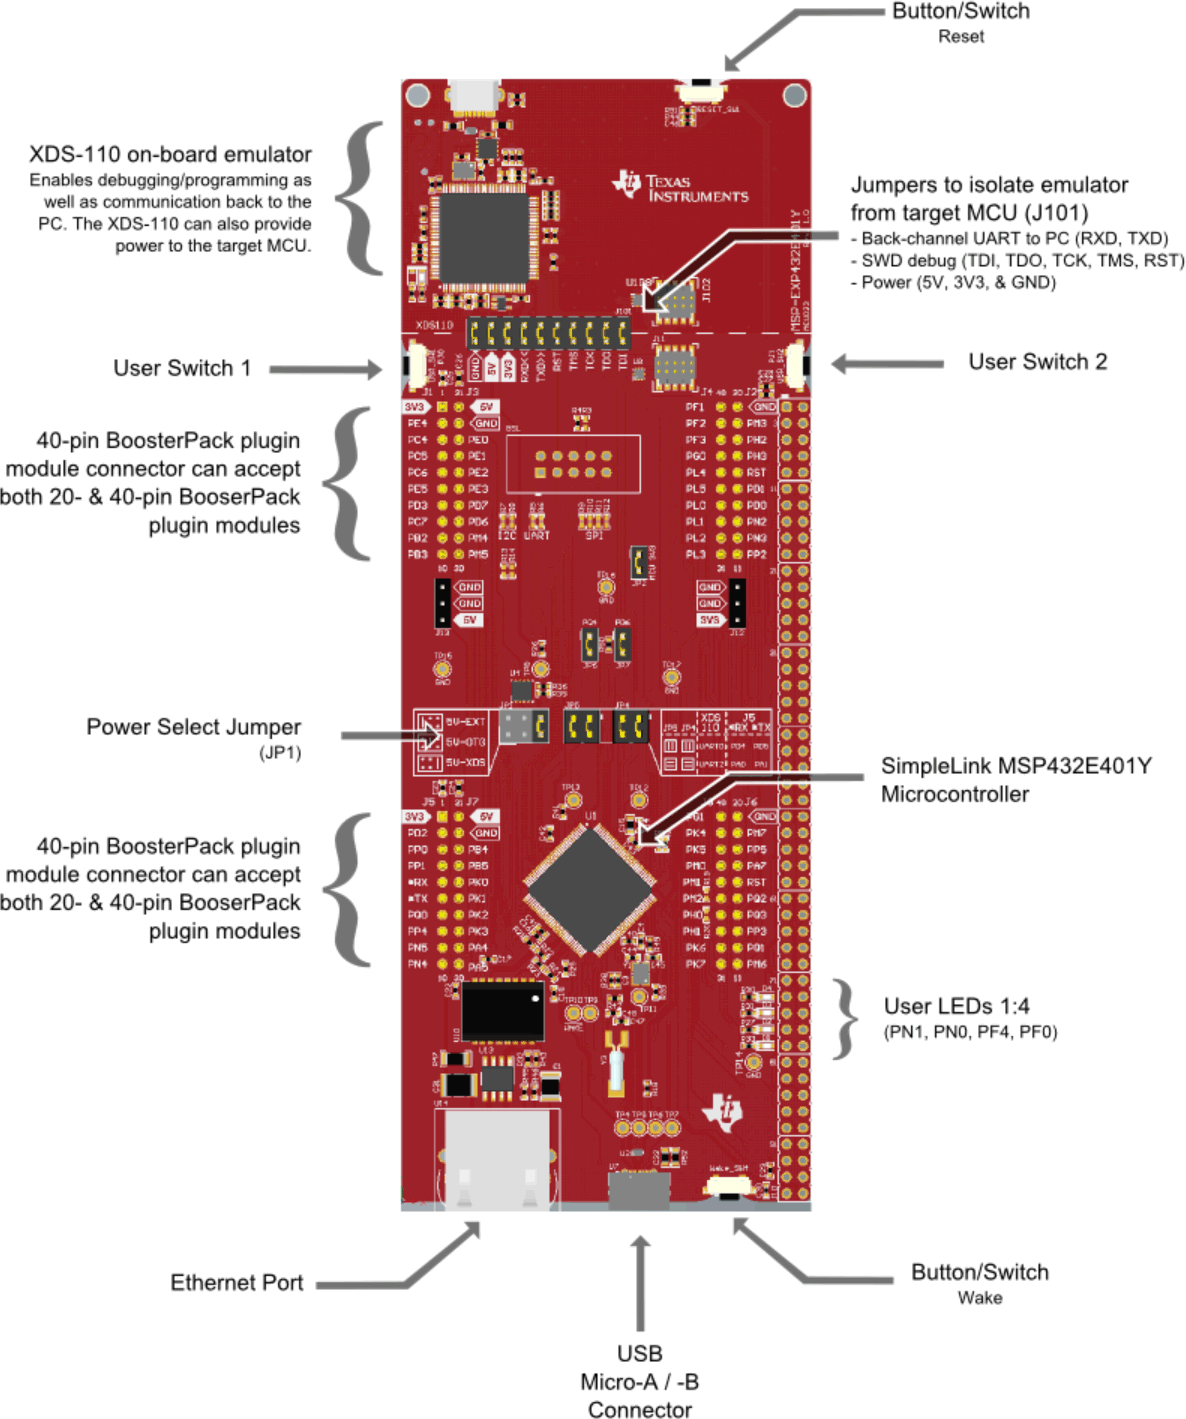 fig01-board-photo.png